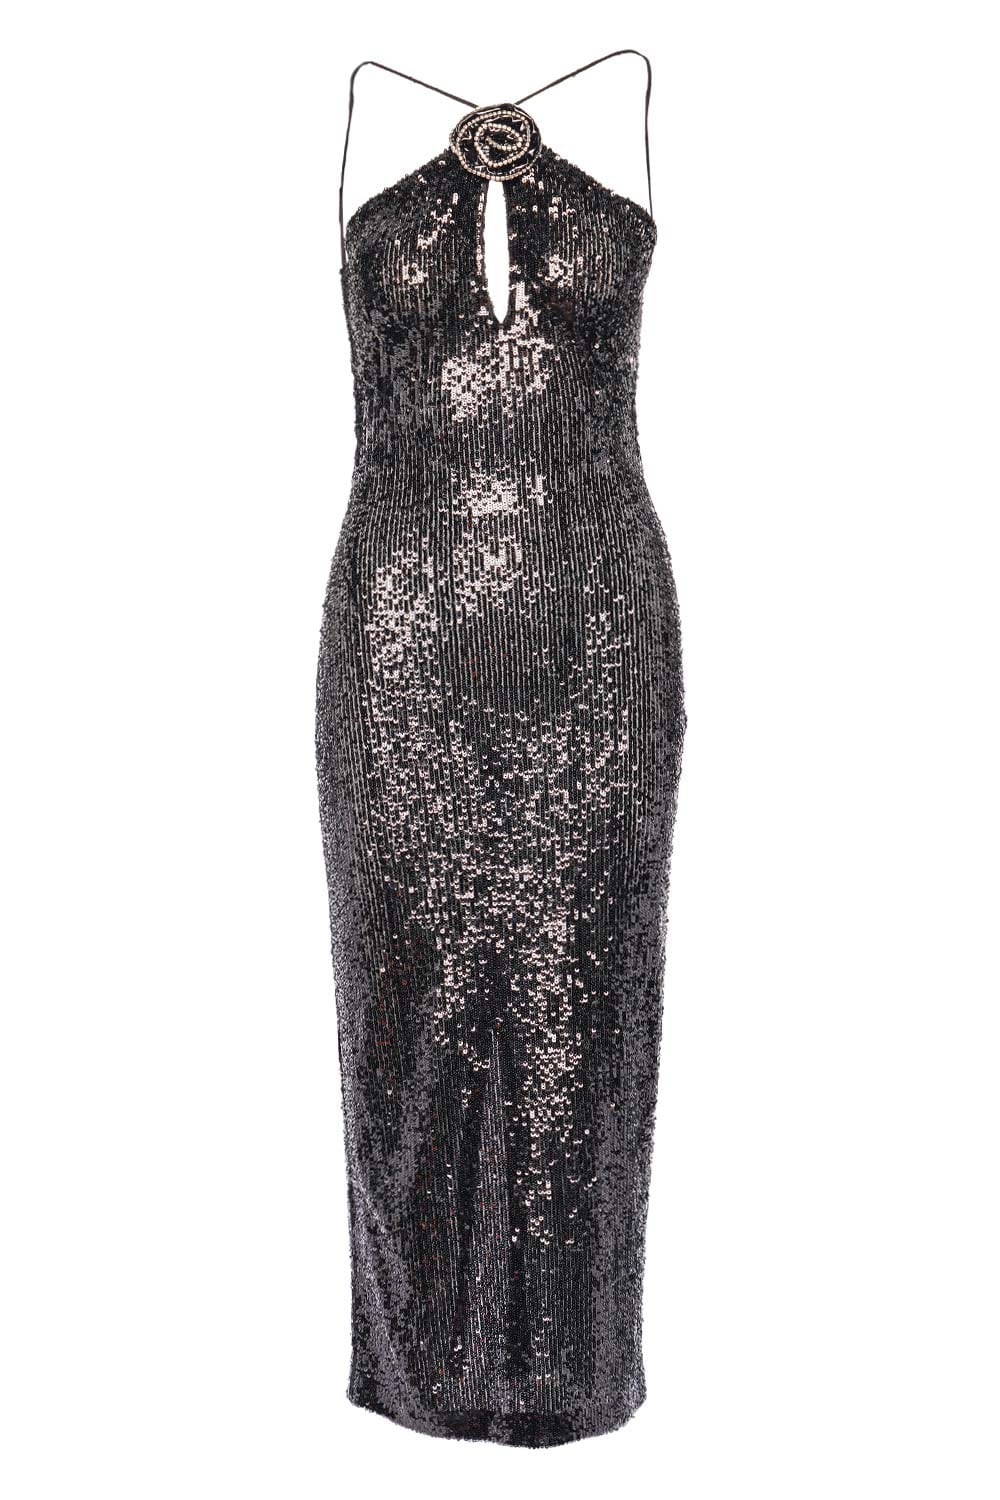 The New Arrivals by Ilkyaz Ozel Flore Rose Sequined Halter Maxi Dress